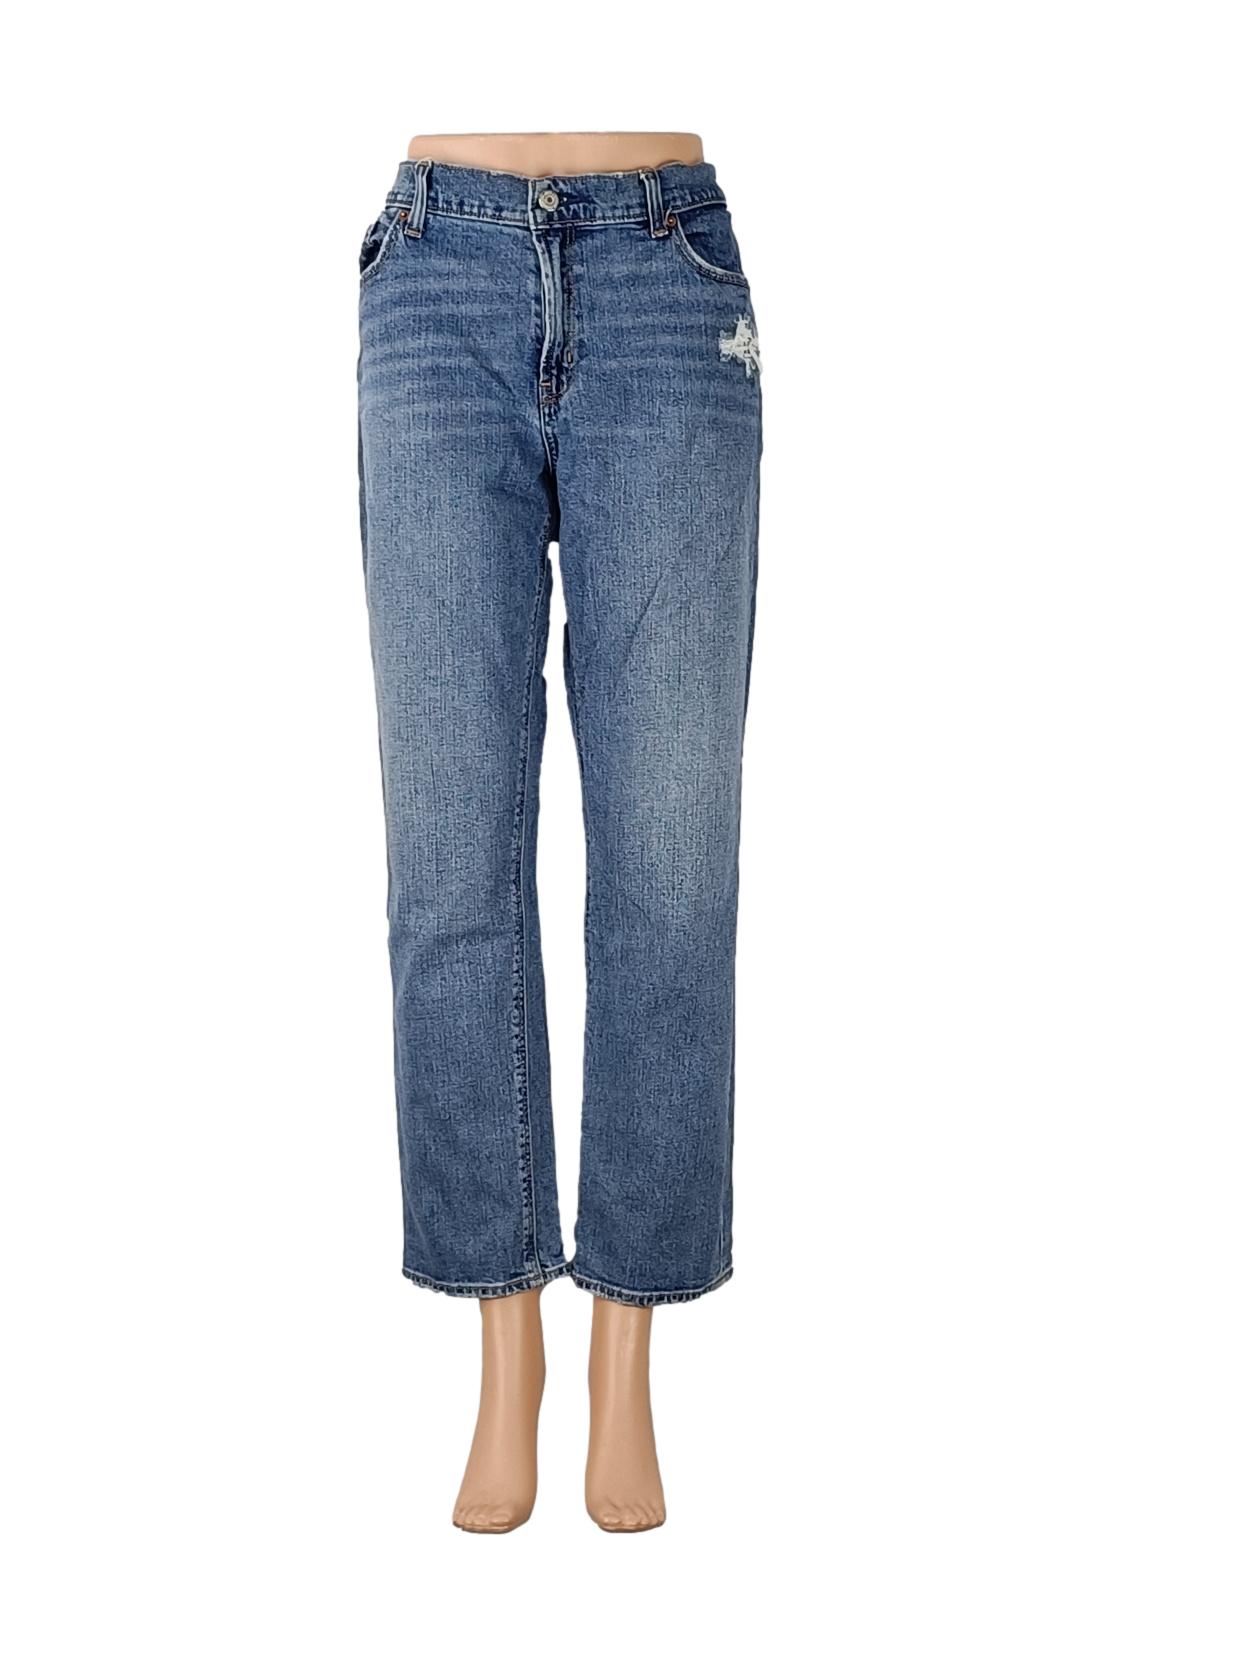 Jean Old Navy - Taille 42